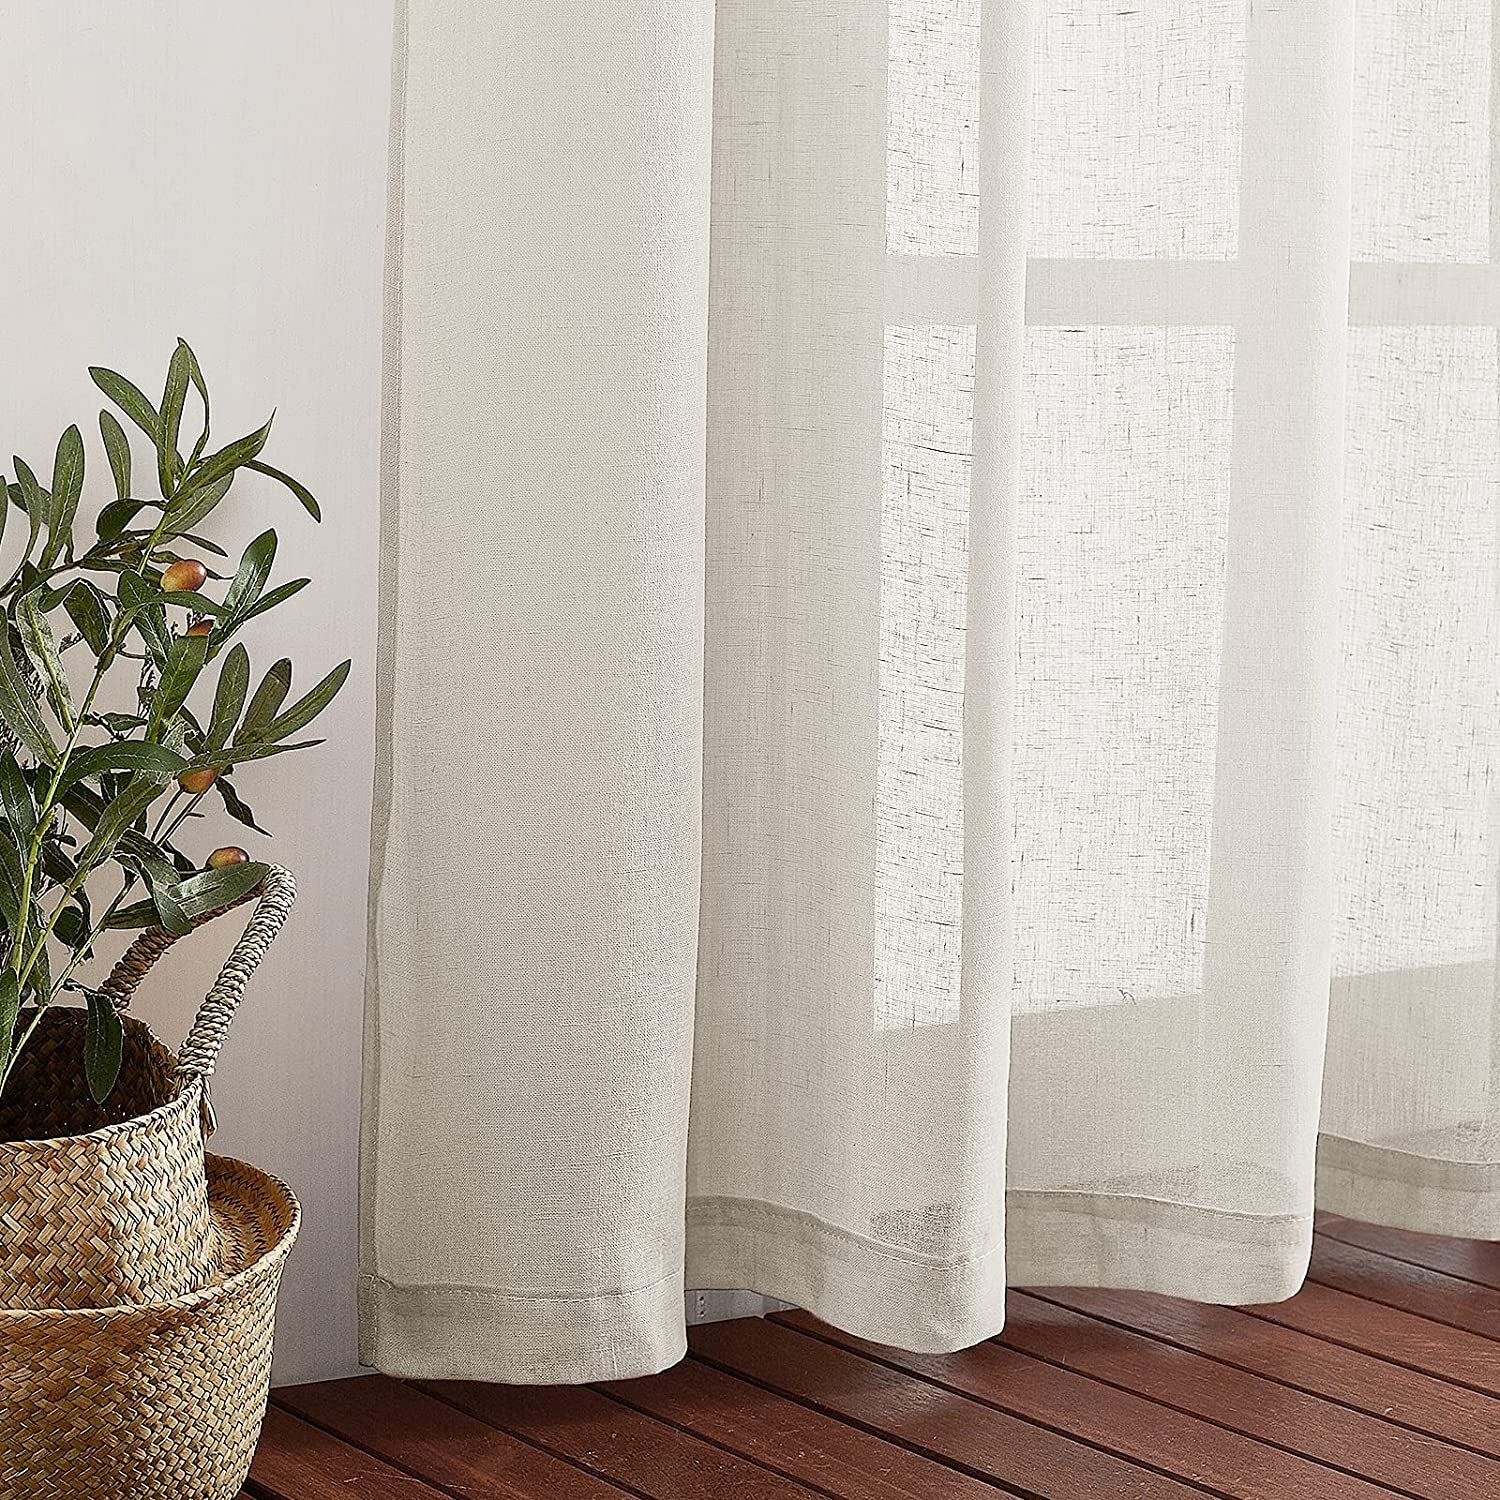 48 Inch Curtains 2 Panels Set for Kitchen, Grommet Semi Sheer Short Curtains & Drapes Privacy with Light Filtering for Cafe/Small Window, Natural, W36 X L48, 2 Pieces